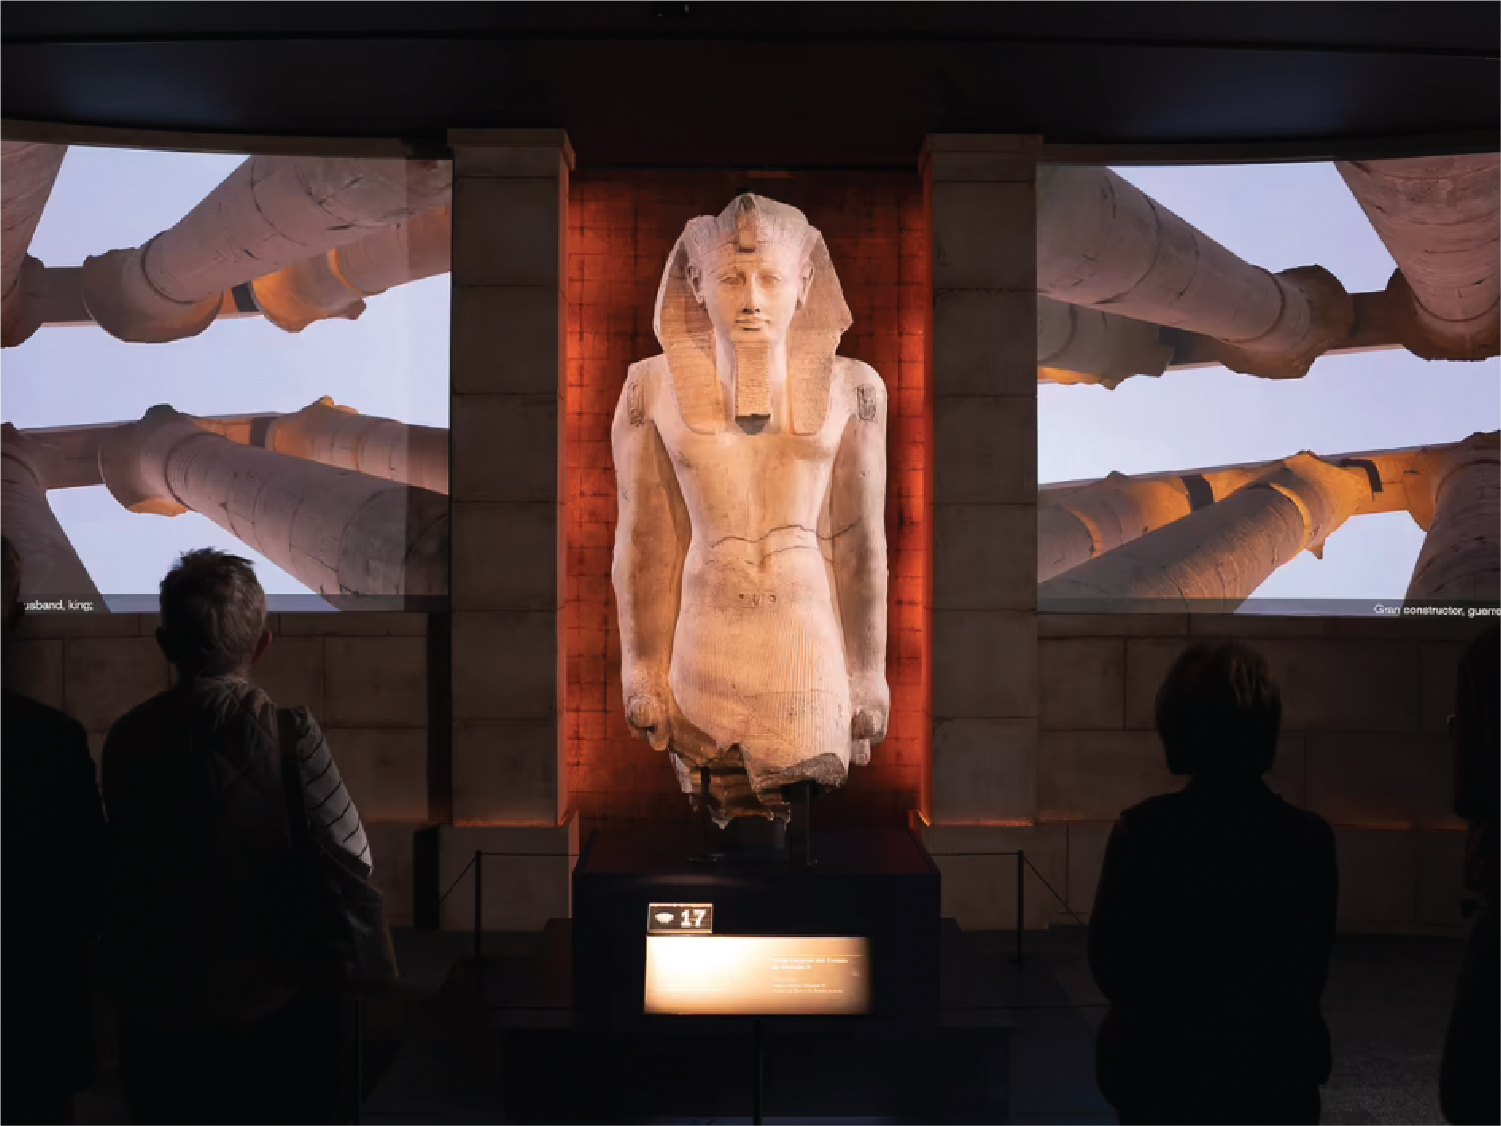 A Guide to ‘Ramses the Great’: 8 Takeaways From the De Young’s New Exhibit of Ancient Egyptian Artifacts